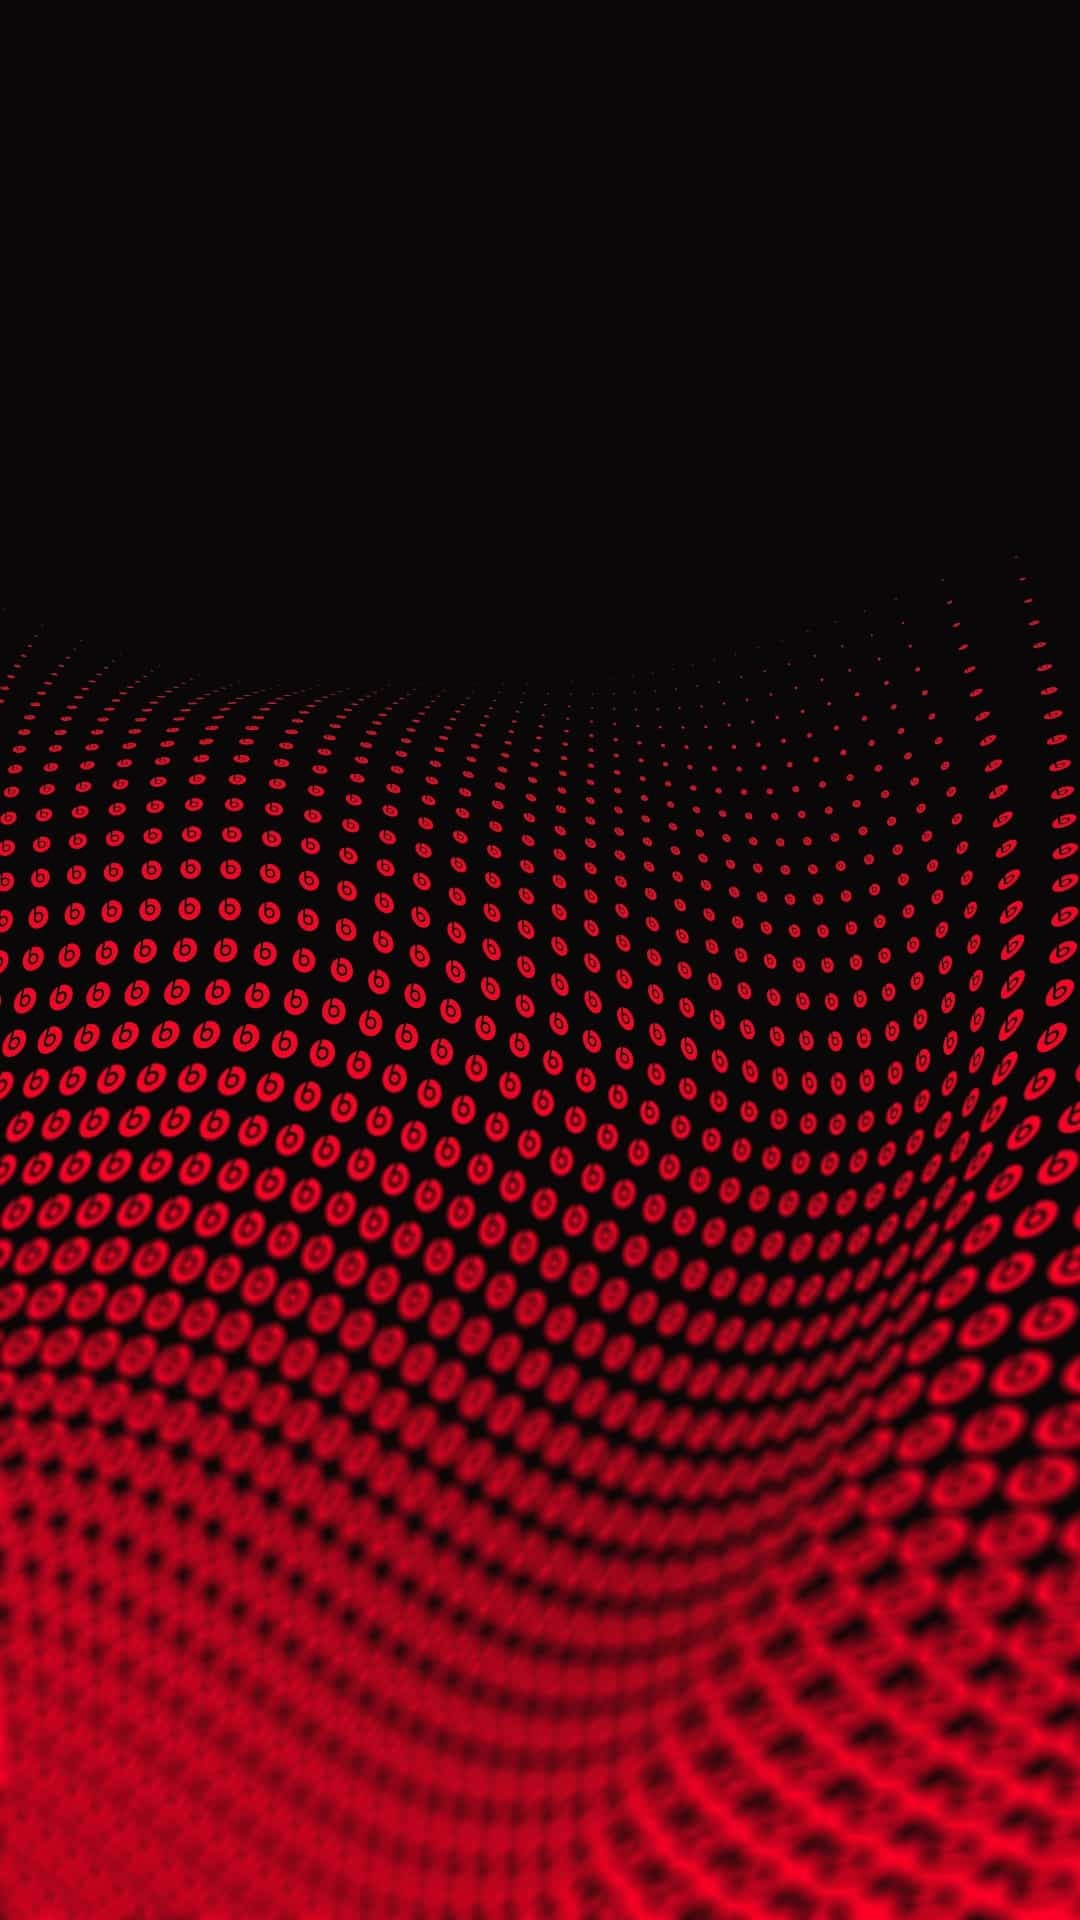 1080x1920 http://wallpaperformobile.org/14368/red-abstract-wallpaper.